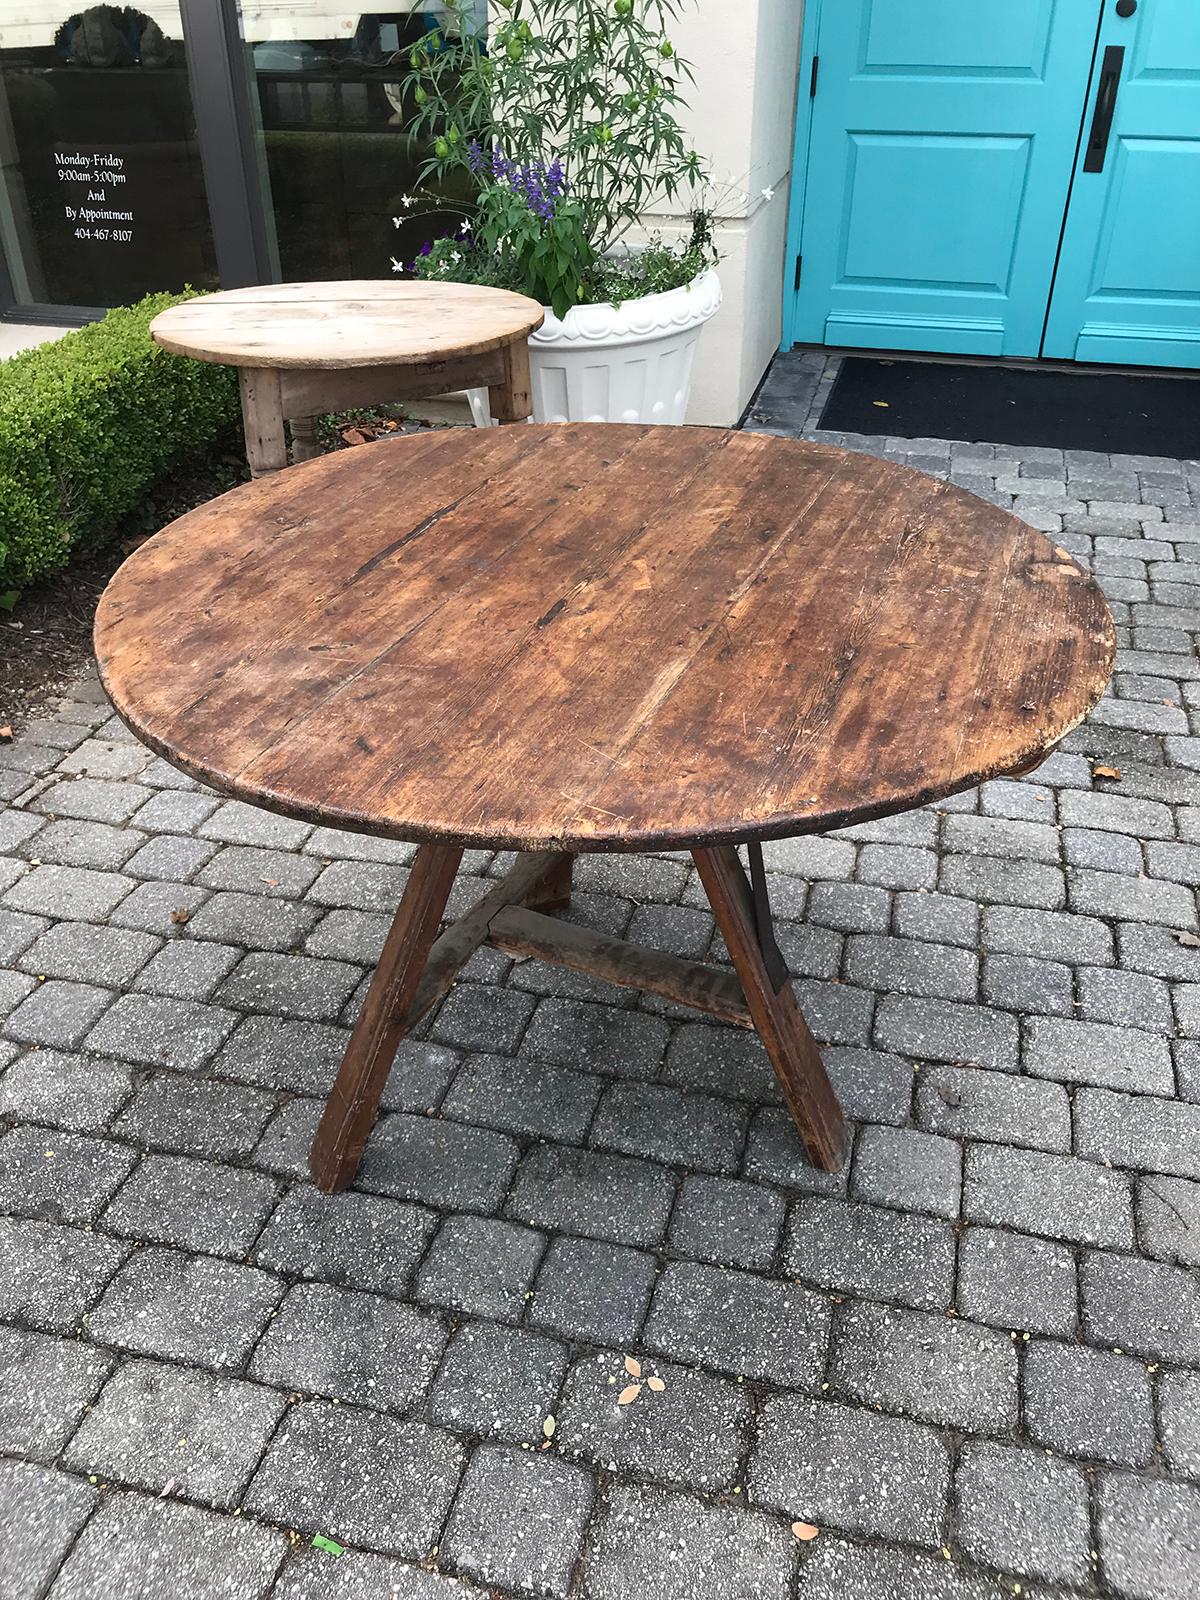 19th-20th Century Old Round Tilt-Top Work Table 3